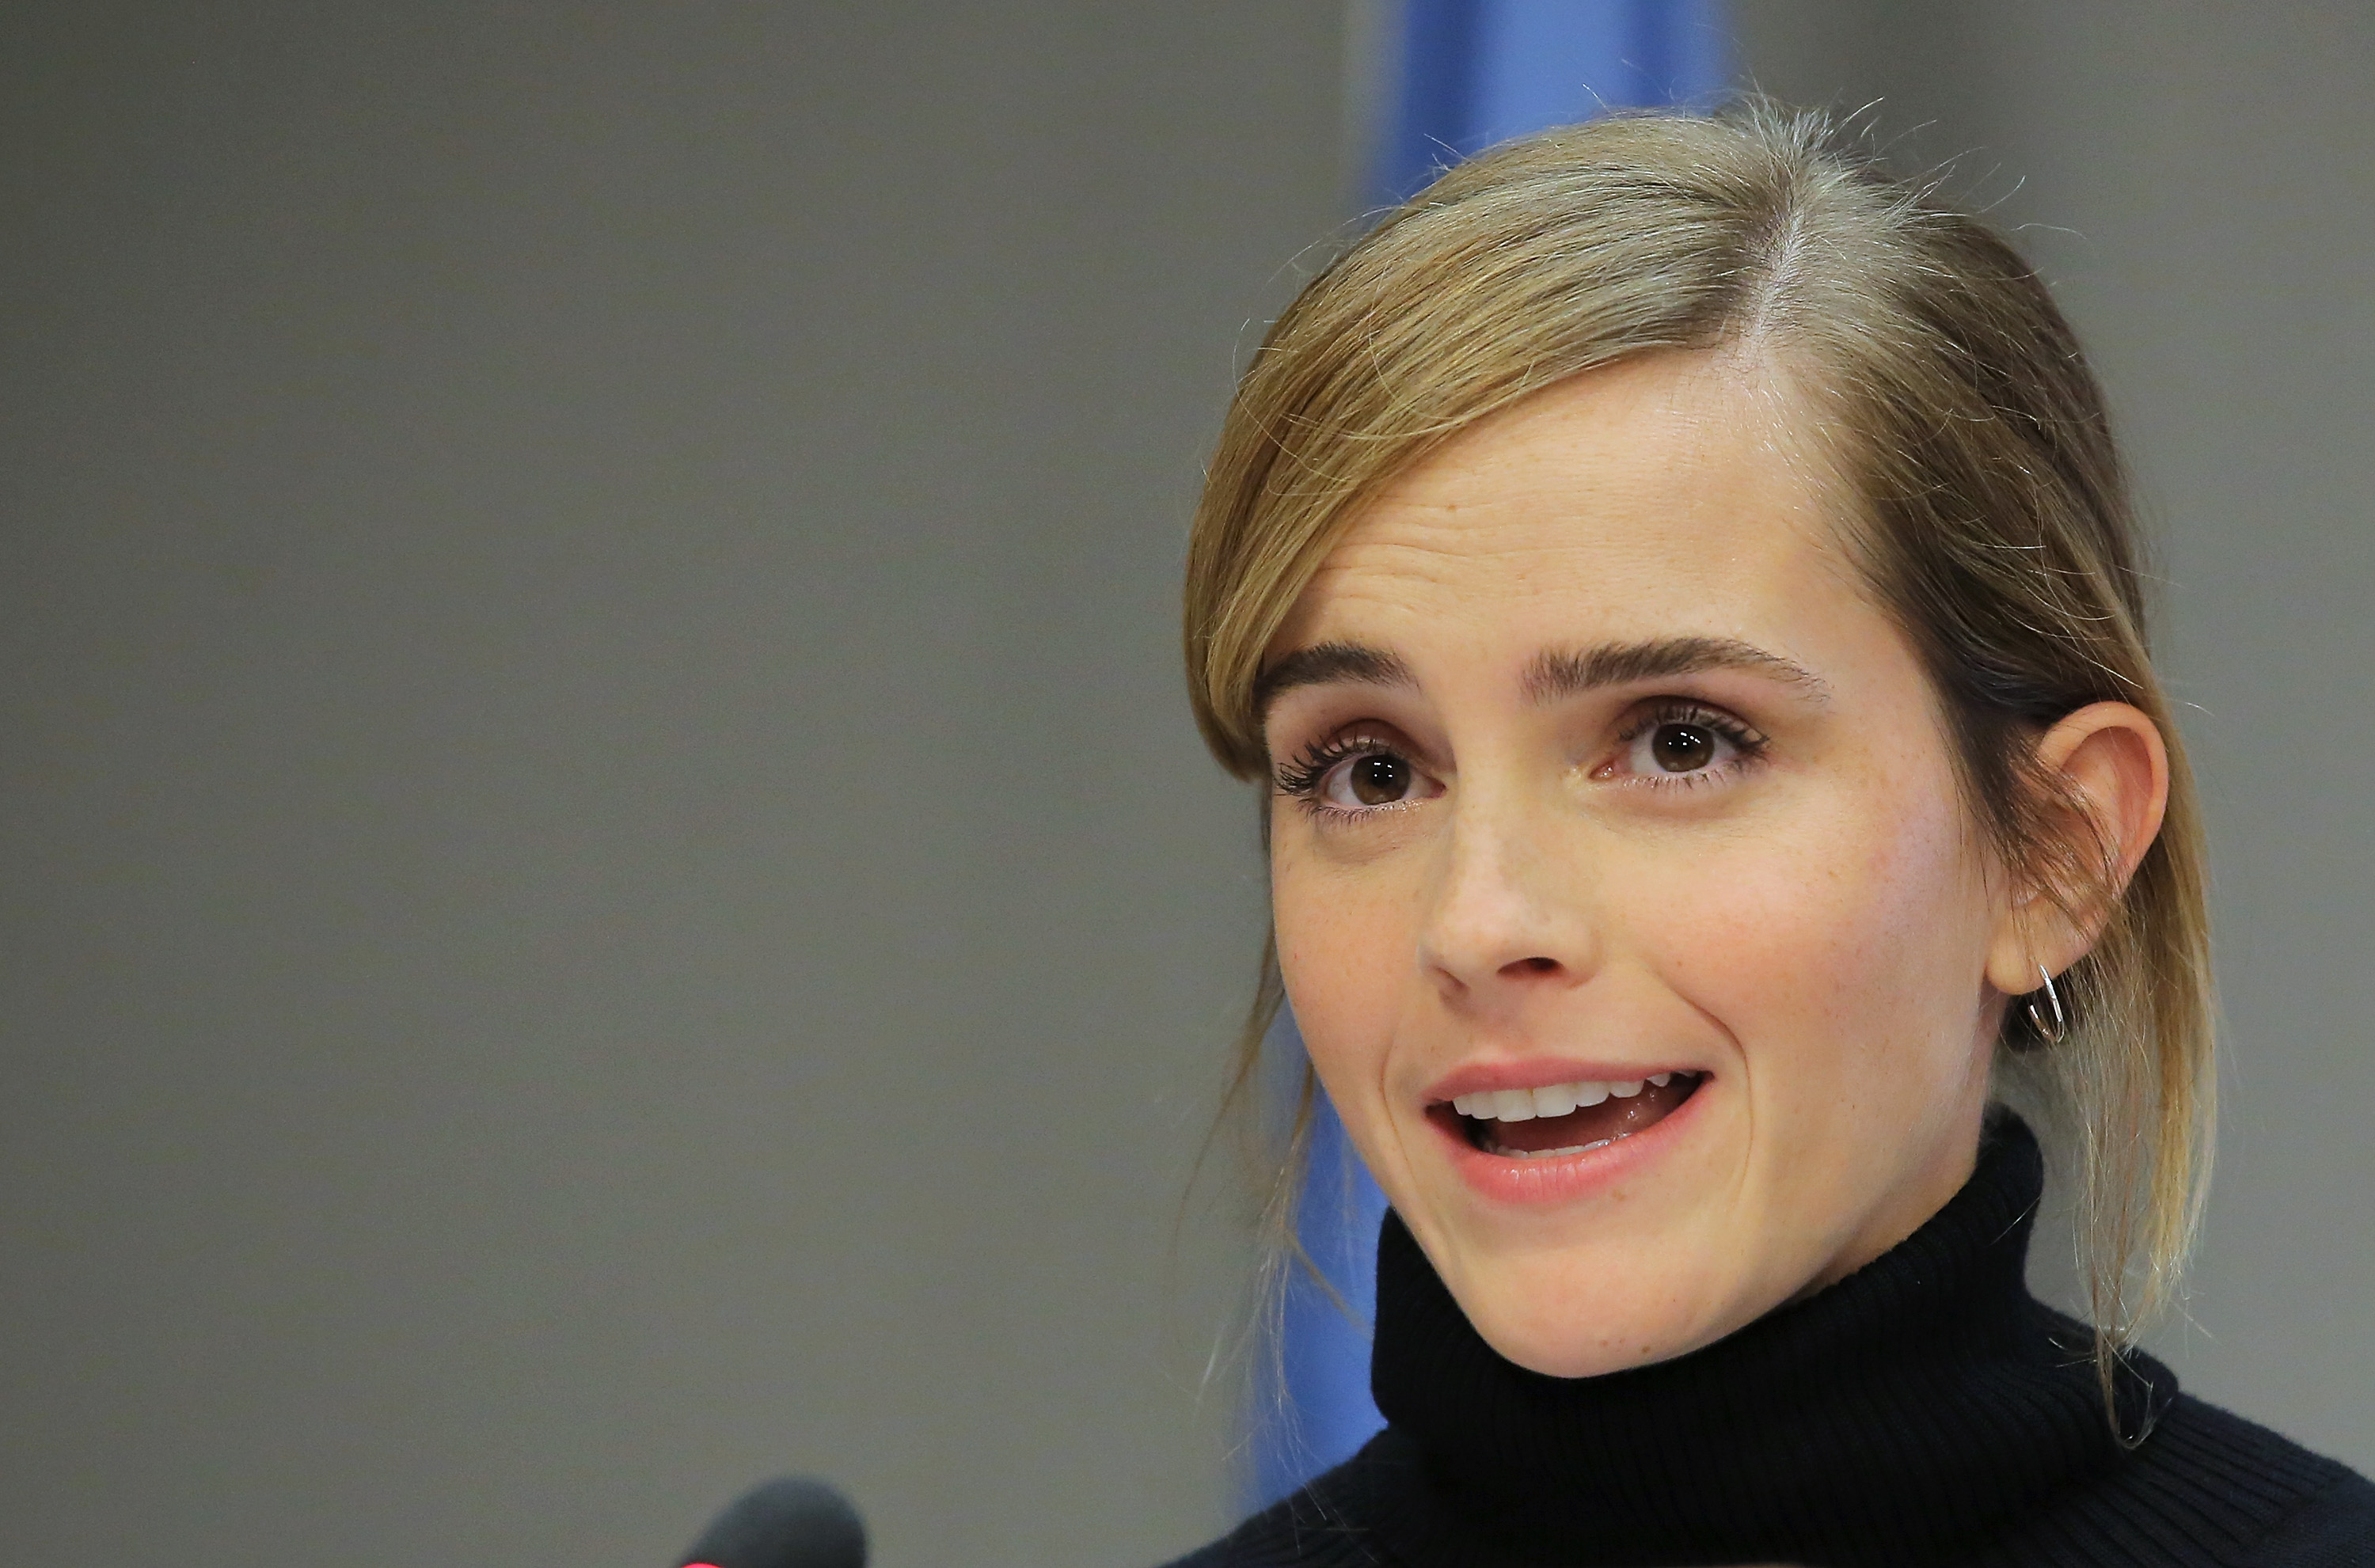 Actress Emma Watson speaks at the launch of the HeForShe IMPACT 10x10x10 University Parity Report at The United Nations on Sept. 20, 2016 in New York City. (J. Countess—Getty Images)